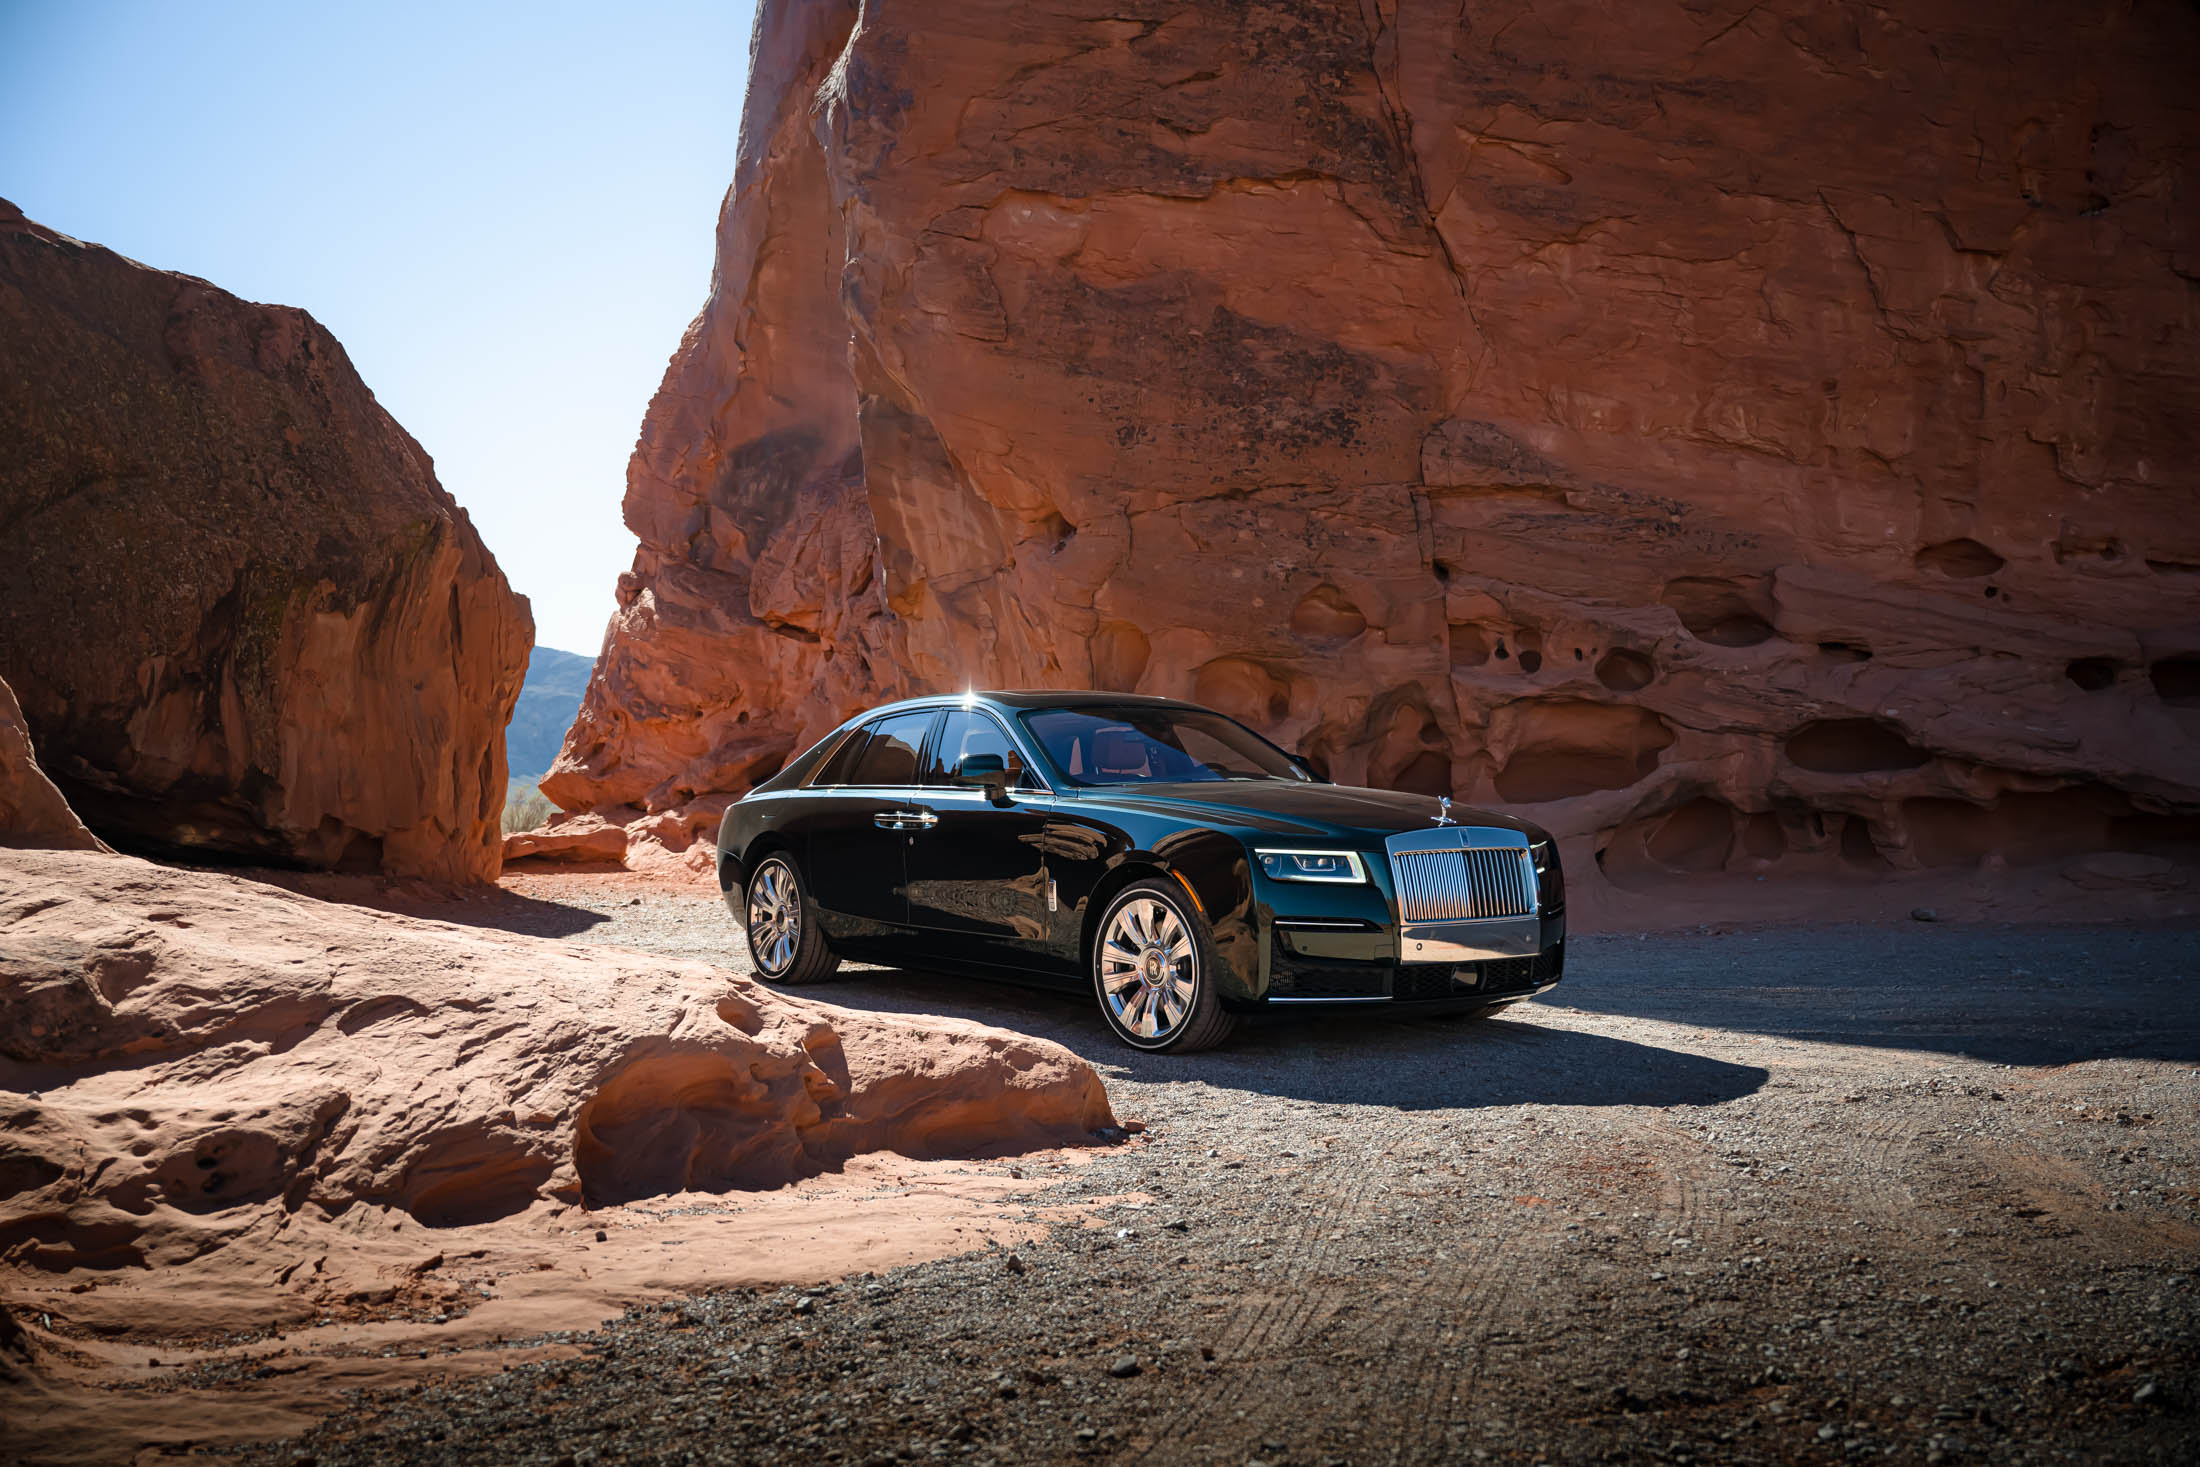 The Rolls-Royce Ghost Is an Unlikely Object of My Obsession